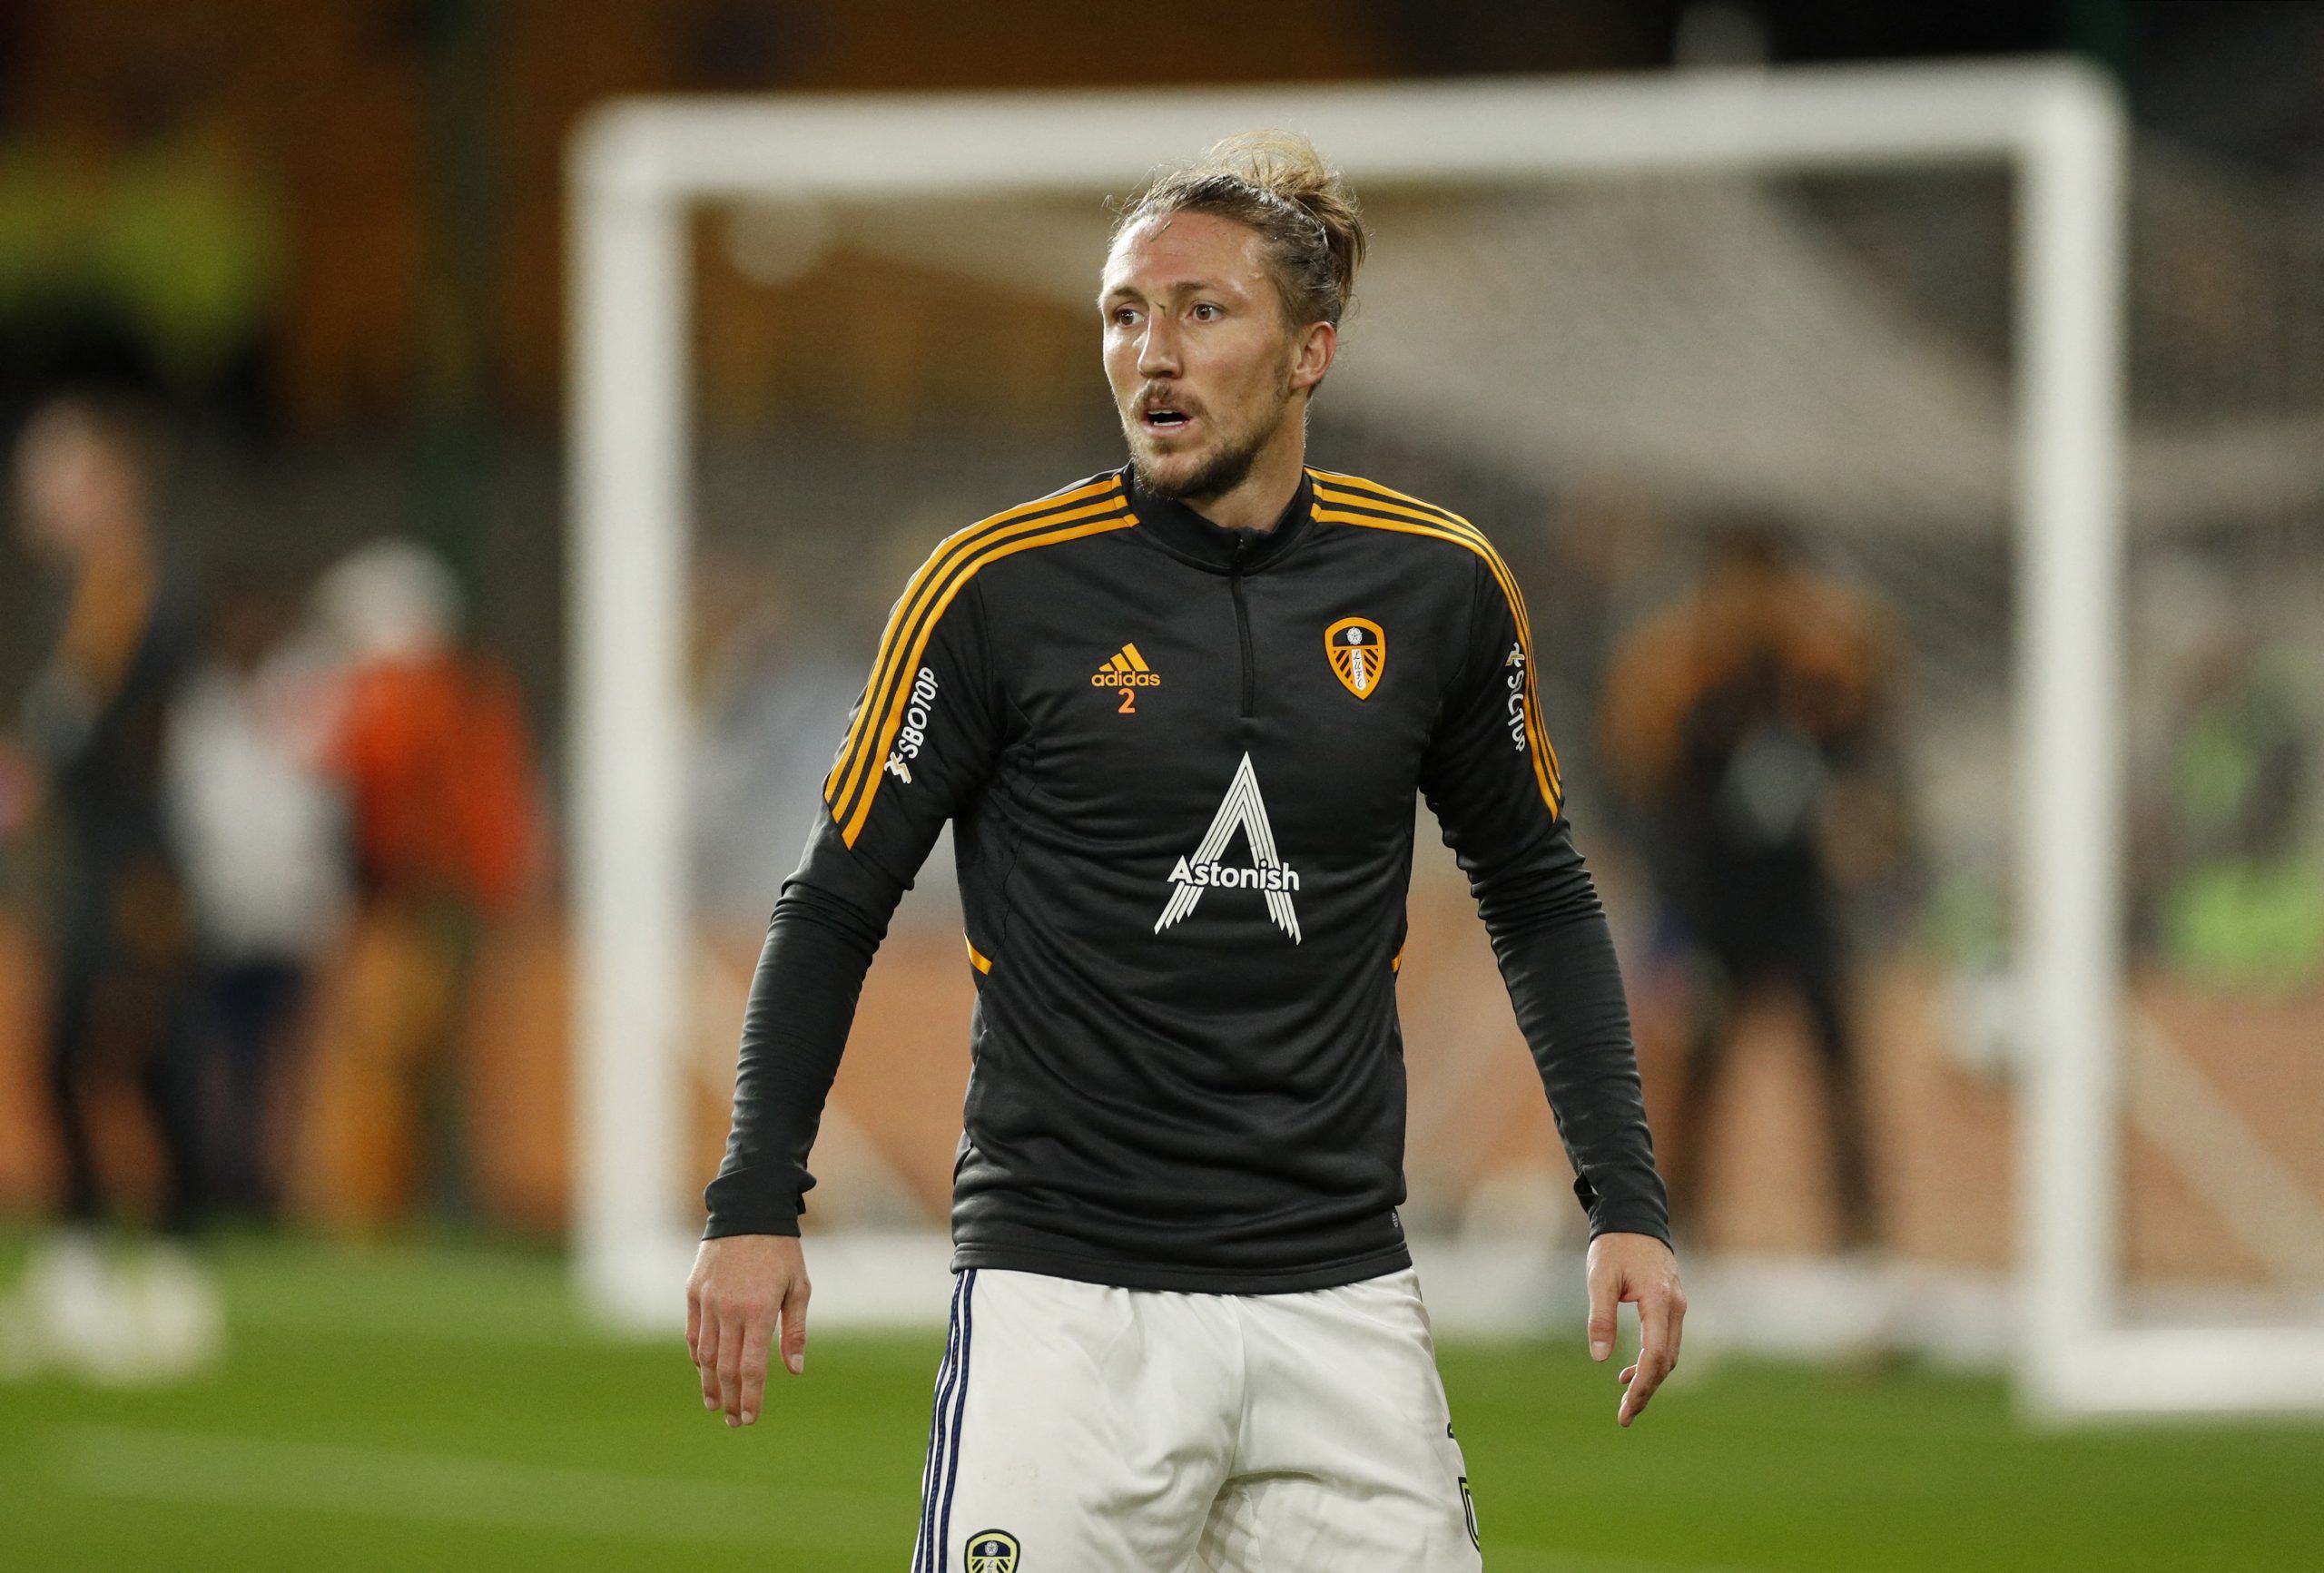 Leeds: Luke Ayling could stay until next summer -Follow up